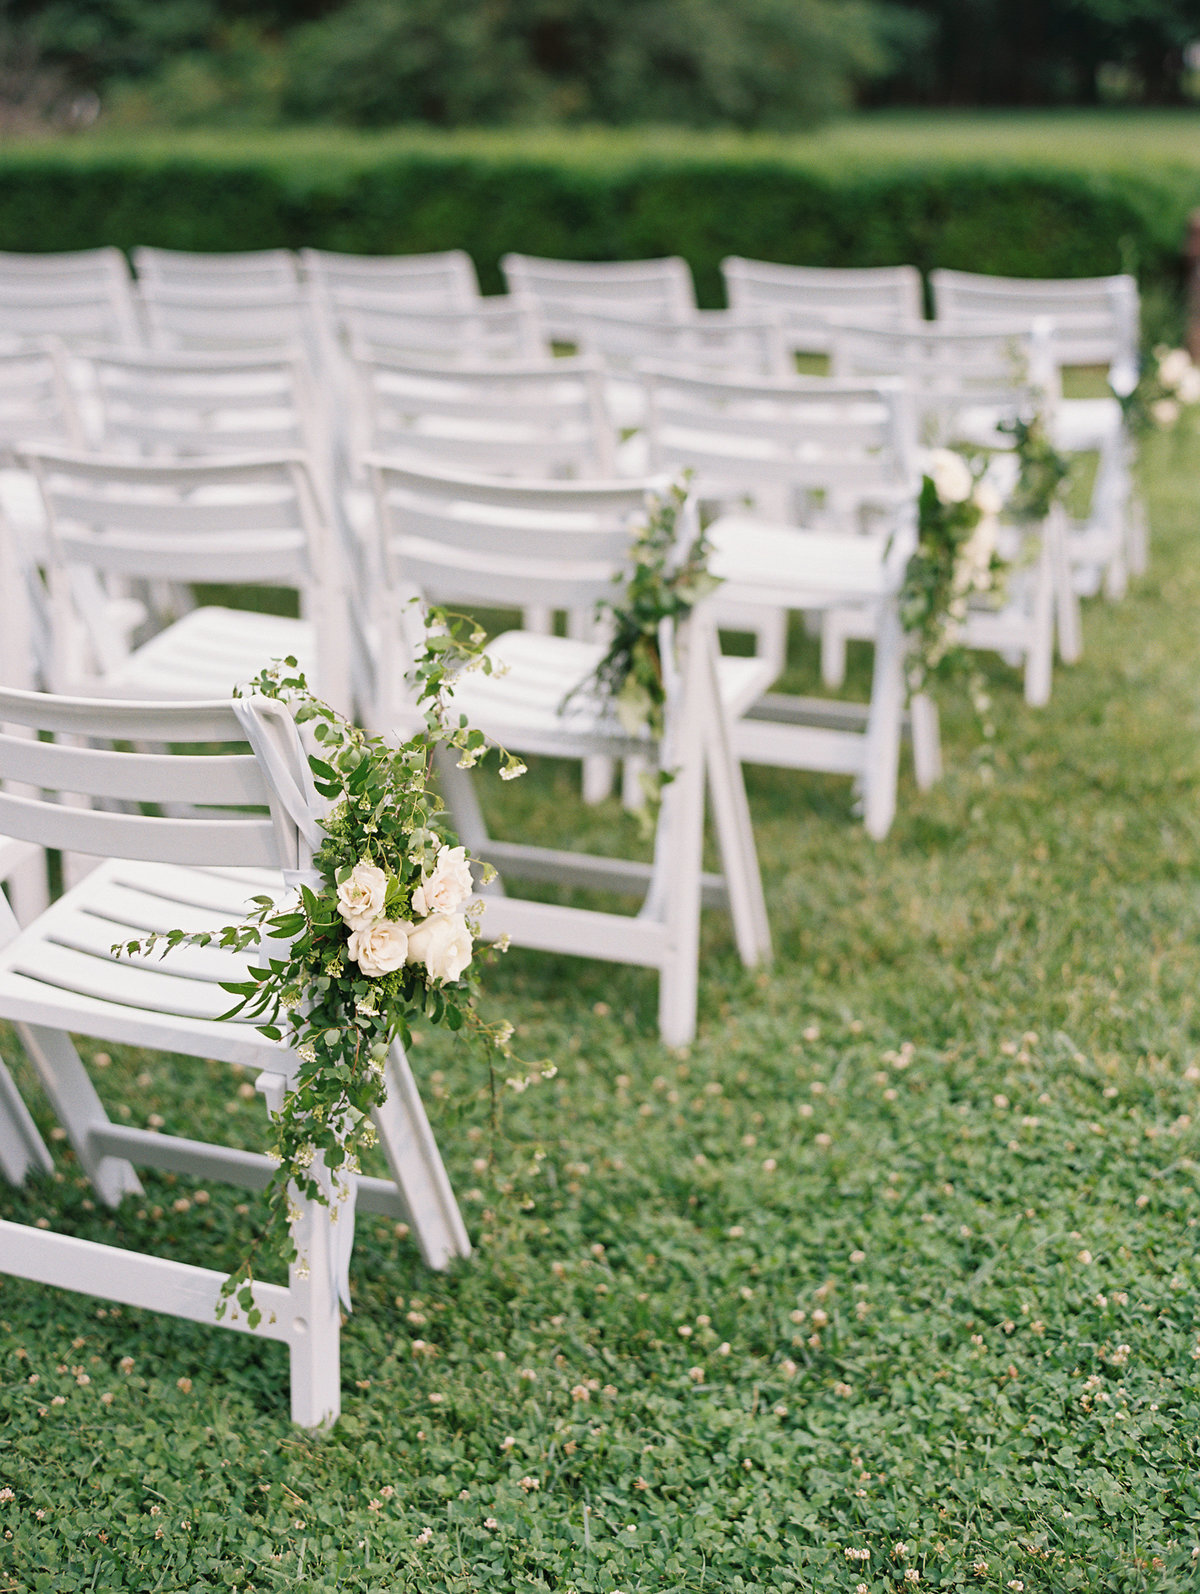 Floral décor with ceremony aisle chairs